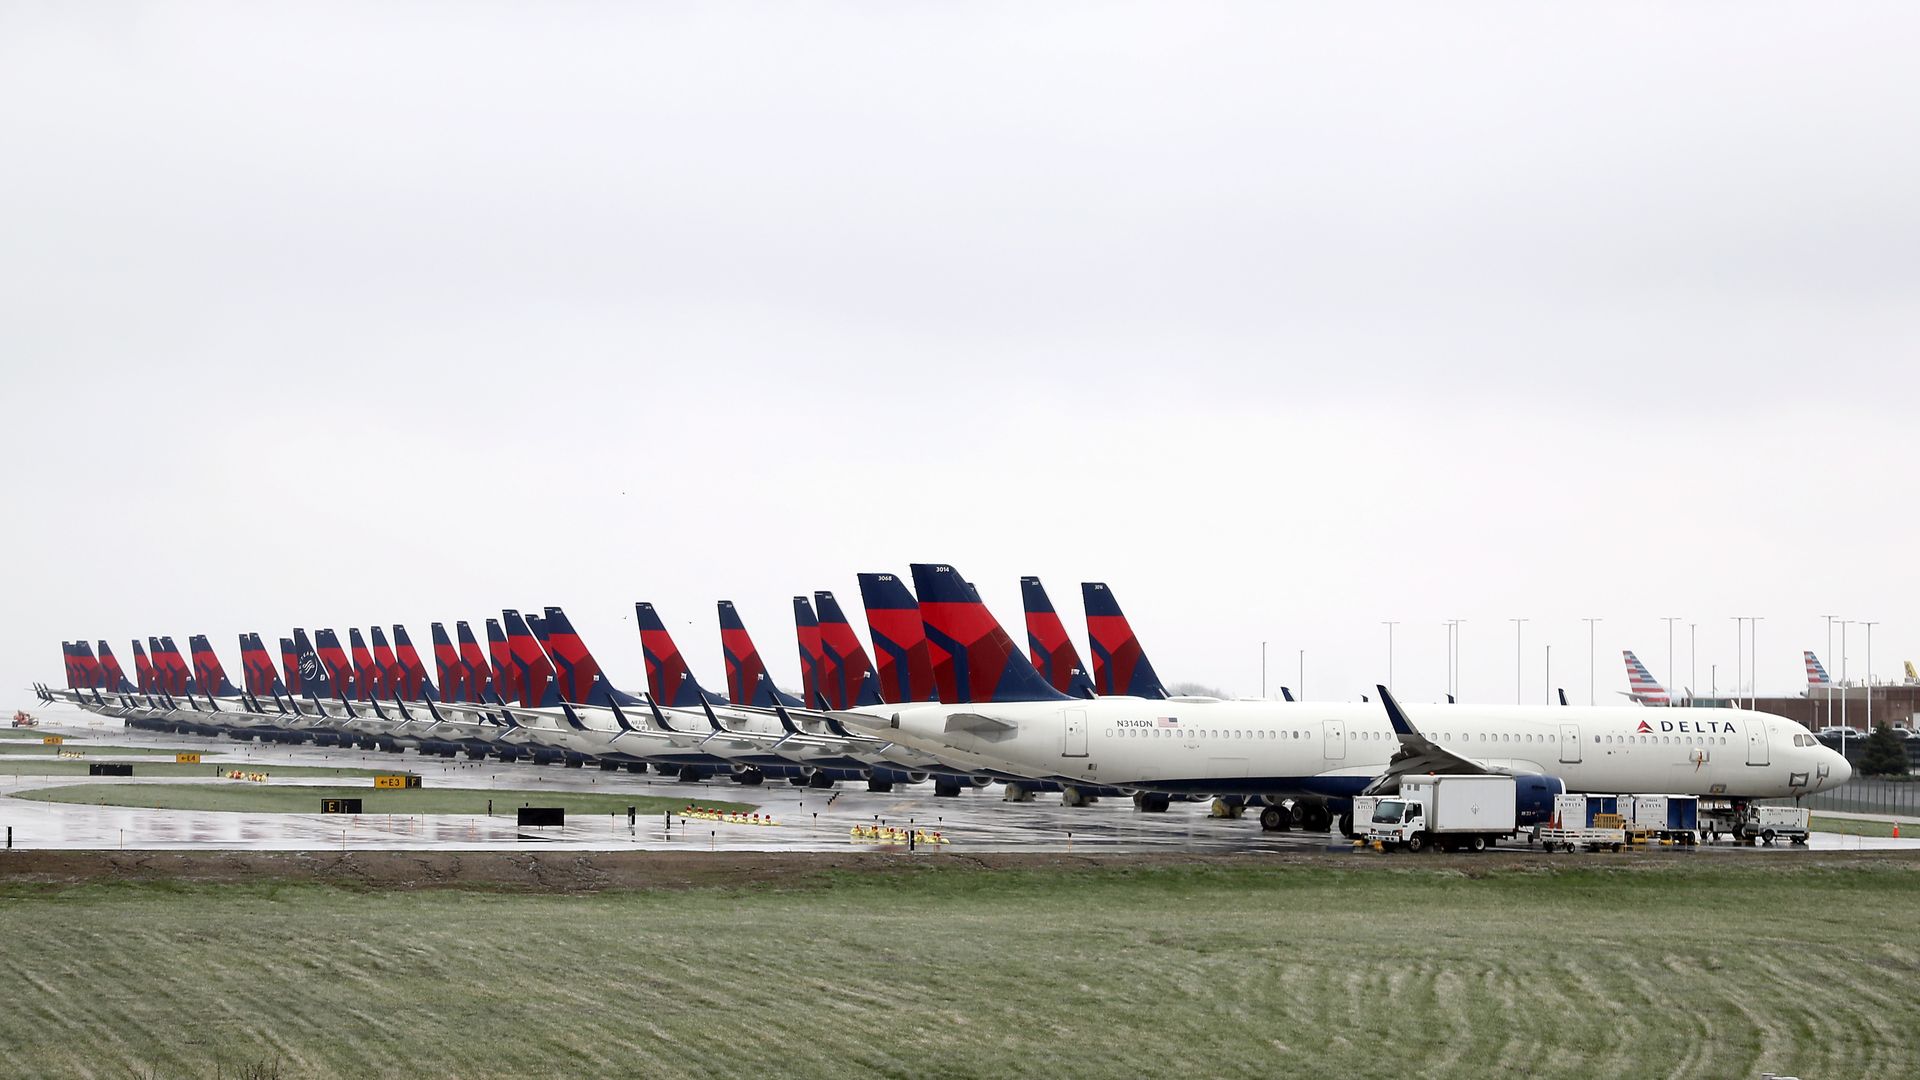 In this image, a row of airplanes sit idly 